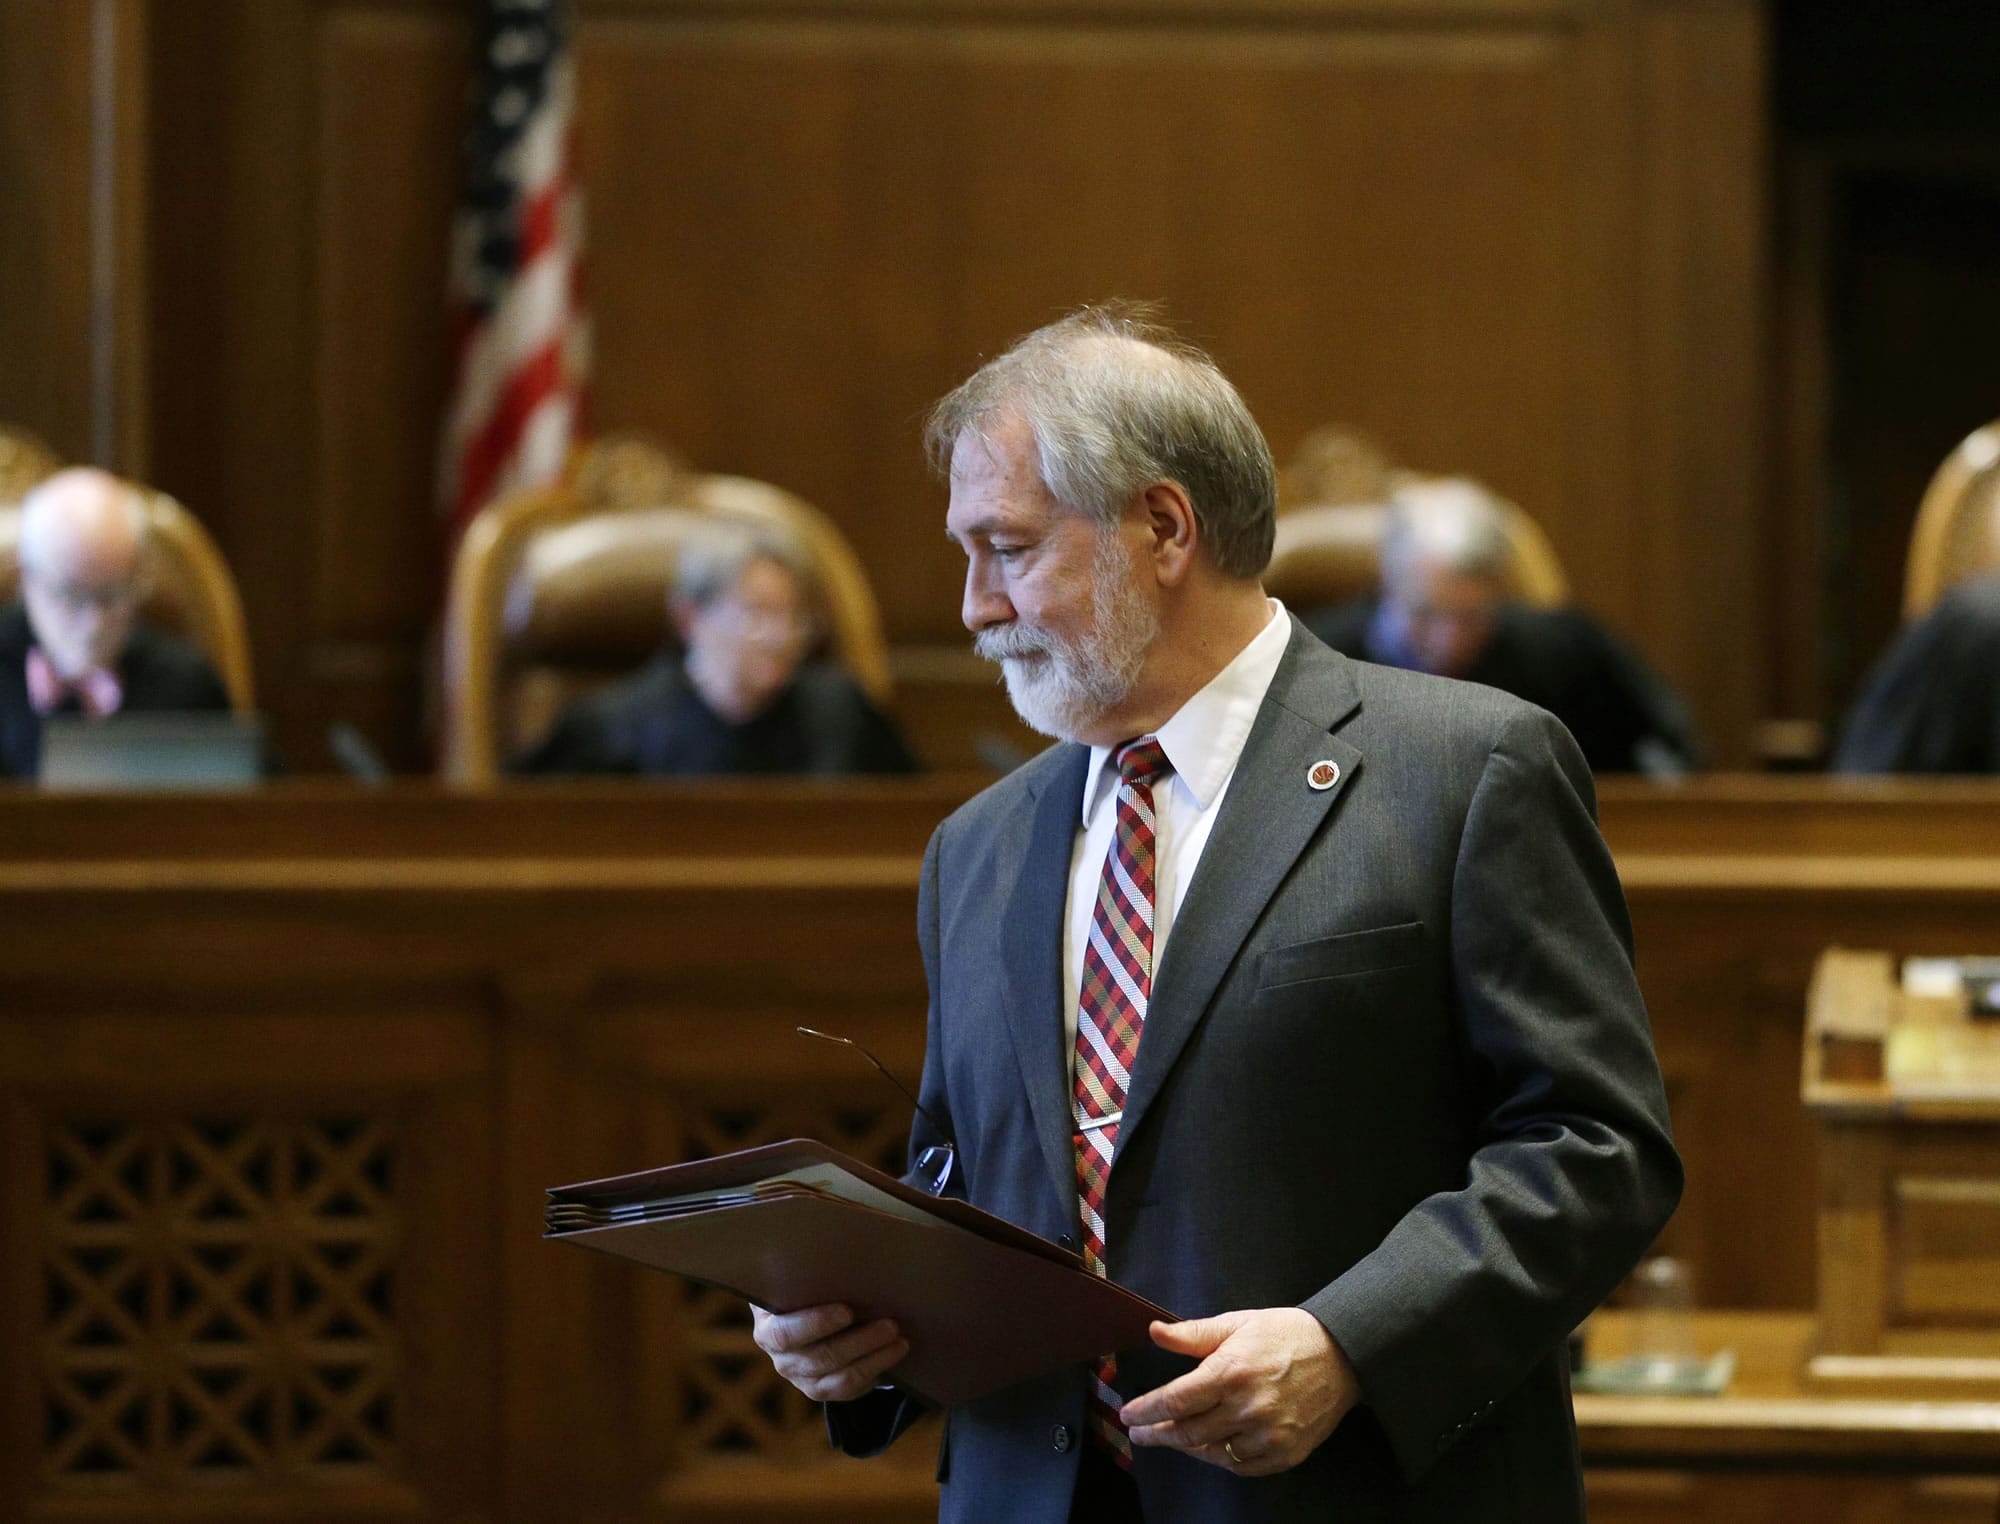 Alan Copsey, deputy solicitor general in the Washington state attorney general's office, during a Washington Supreme Court hearing last month in Olympia. The court ruled Wednesday that while lawmakers have made progress, they are not on track to meet a court-imposed deadline to fully fund basic education, and will remain in contempt of court.